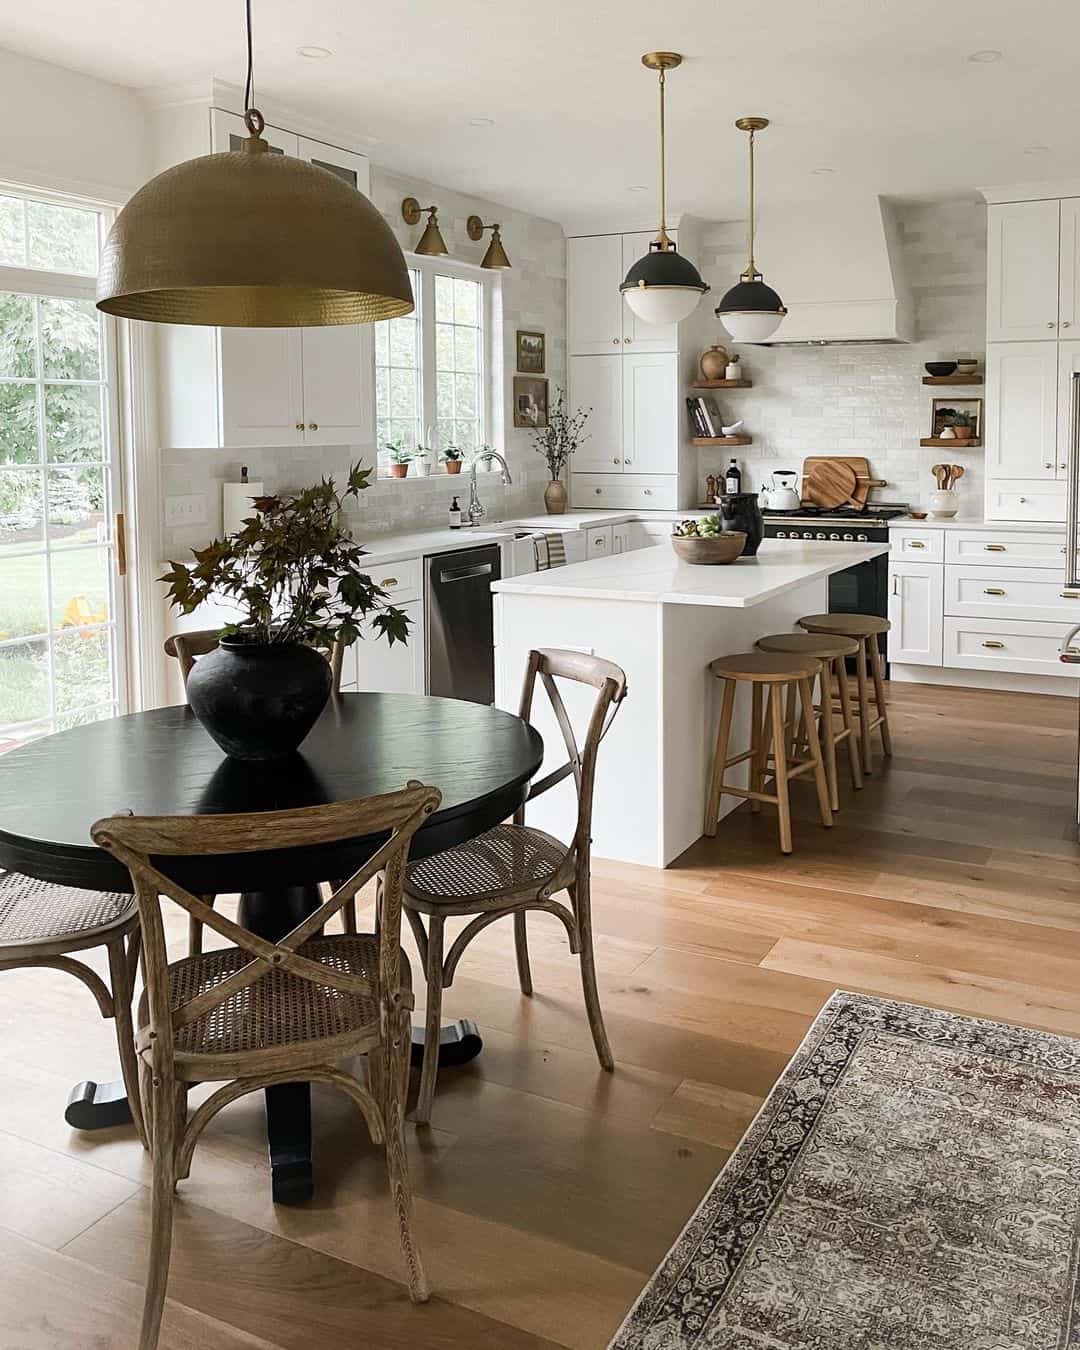 This inviting L-shaped kitchen, enhanced by a center island, is elegantly outfitted with white cabinets adorned with sophisticated gold hardware, all set against pristine white countertops. Suspended above the modern stainless steel stove is a sleek white hood, adding a touch of refinement. Illuminating the scene, a pair of pendulum lamps in a crisp black and white design cast a welcoming glow onto the island's white countertop. Complementing the arrangement, three wooden stools stand upon the inviting warmth of the wooden flooring, creating the perfect spot for gathering and making memories.